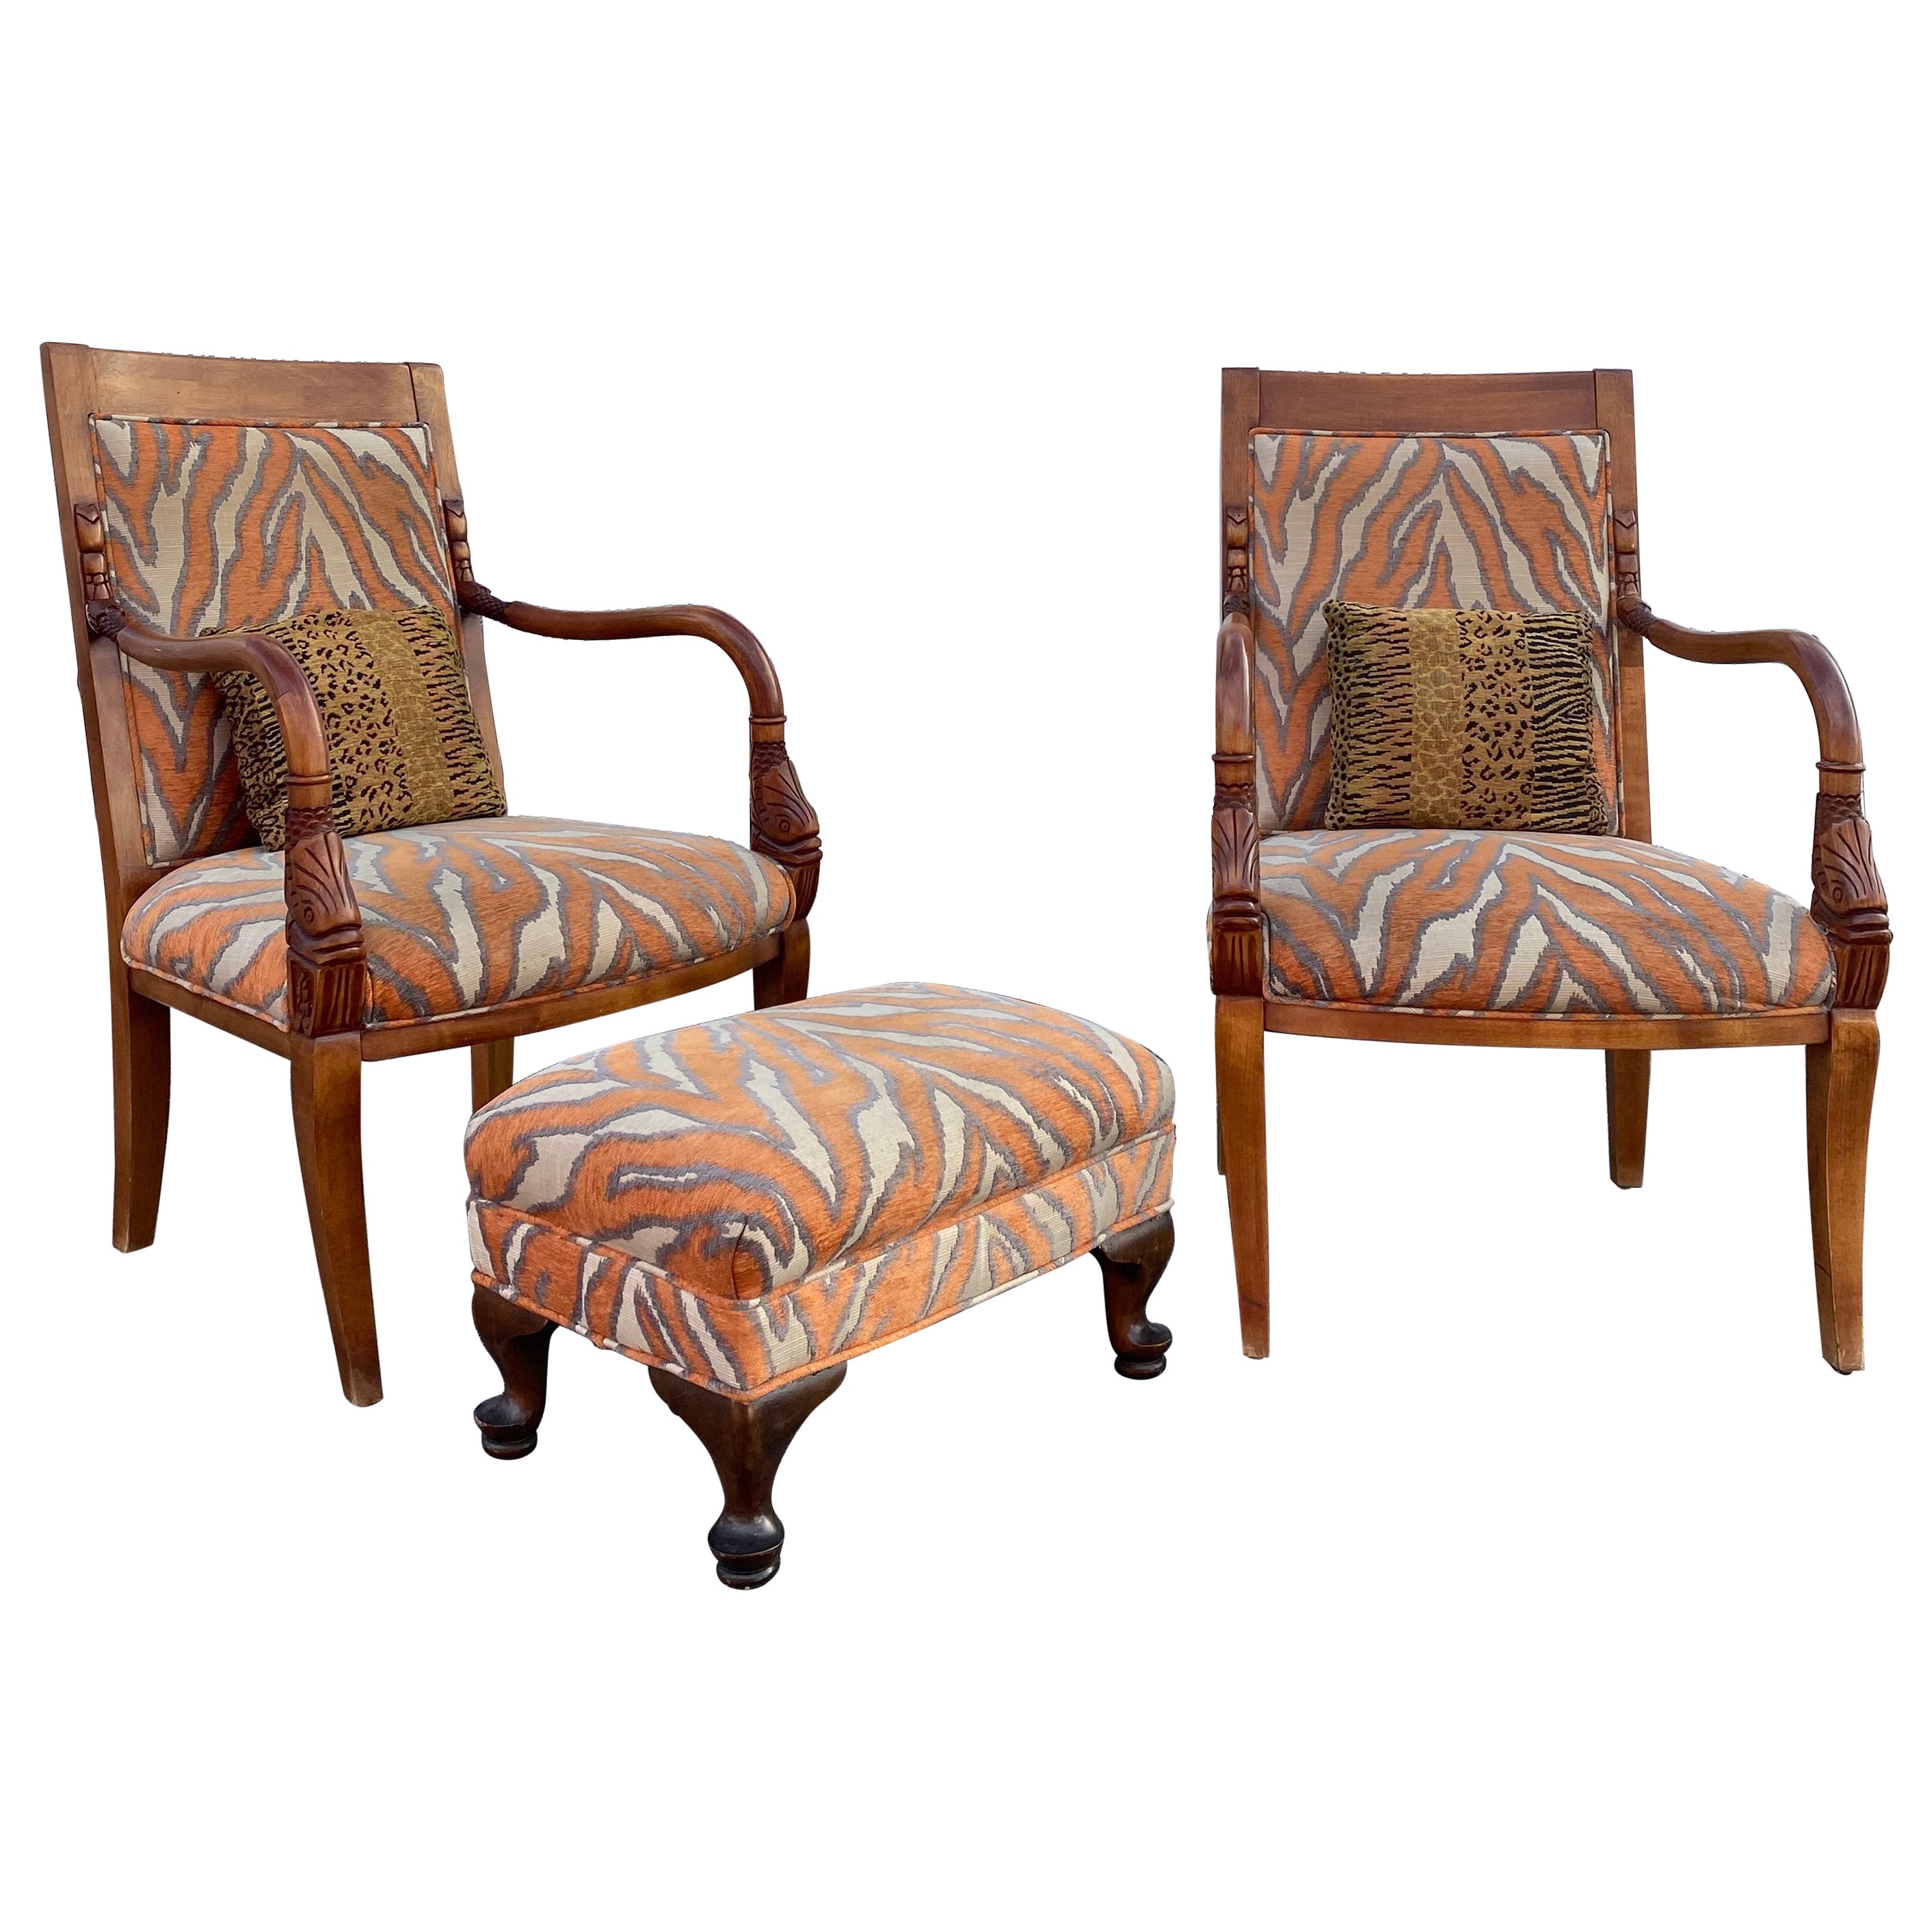 1970s Carved Wood Gold Fish Zebra Bentwood Chairs and Ottoman, Set of 3 For Sale